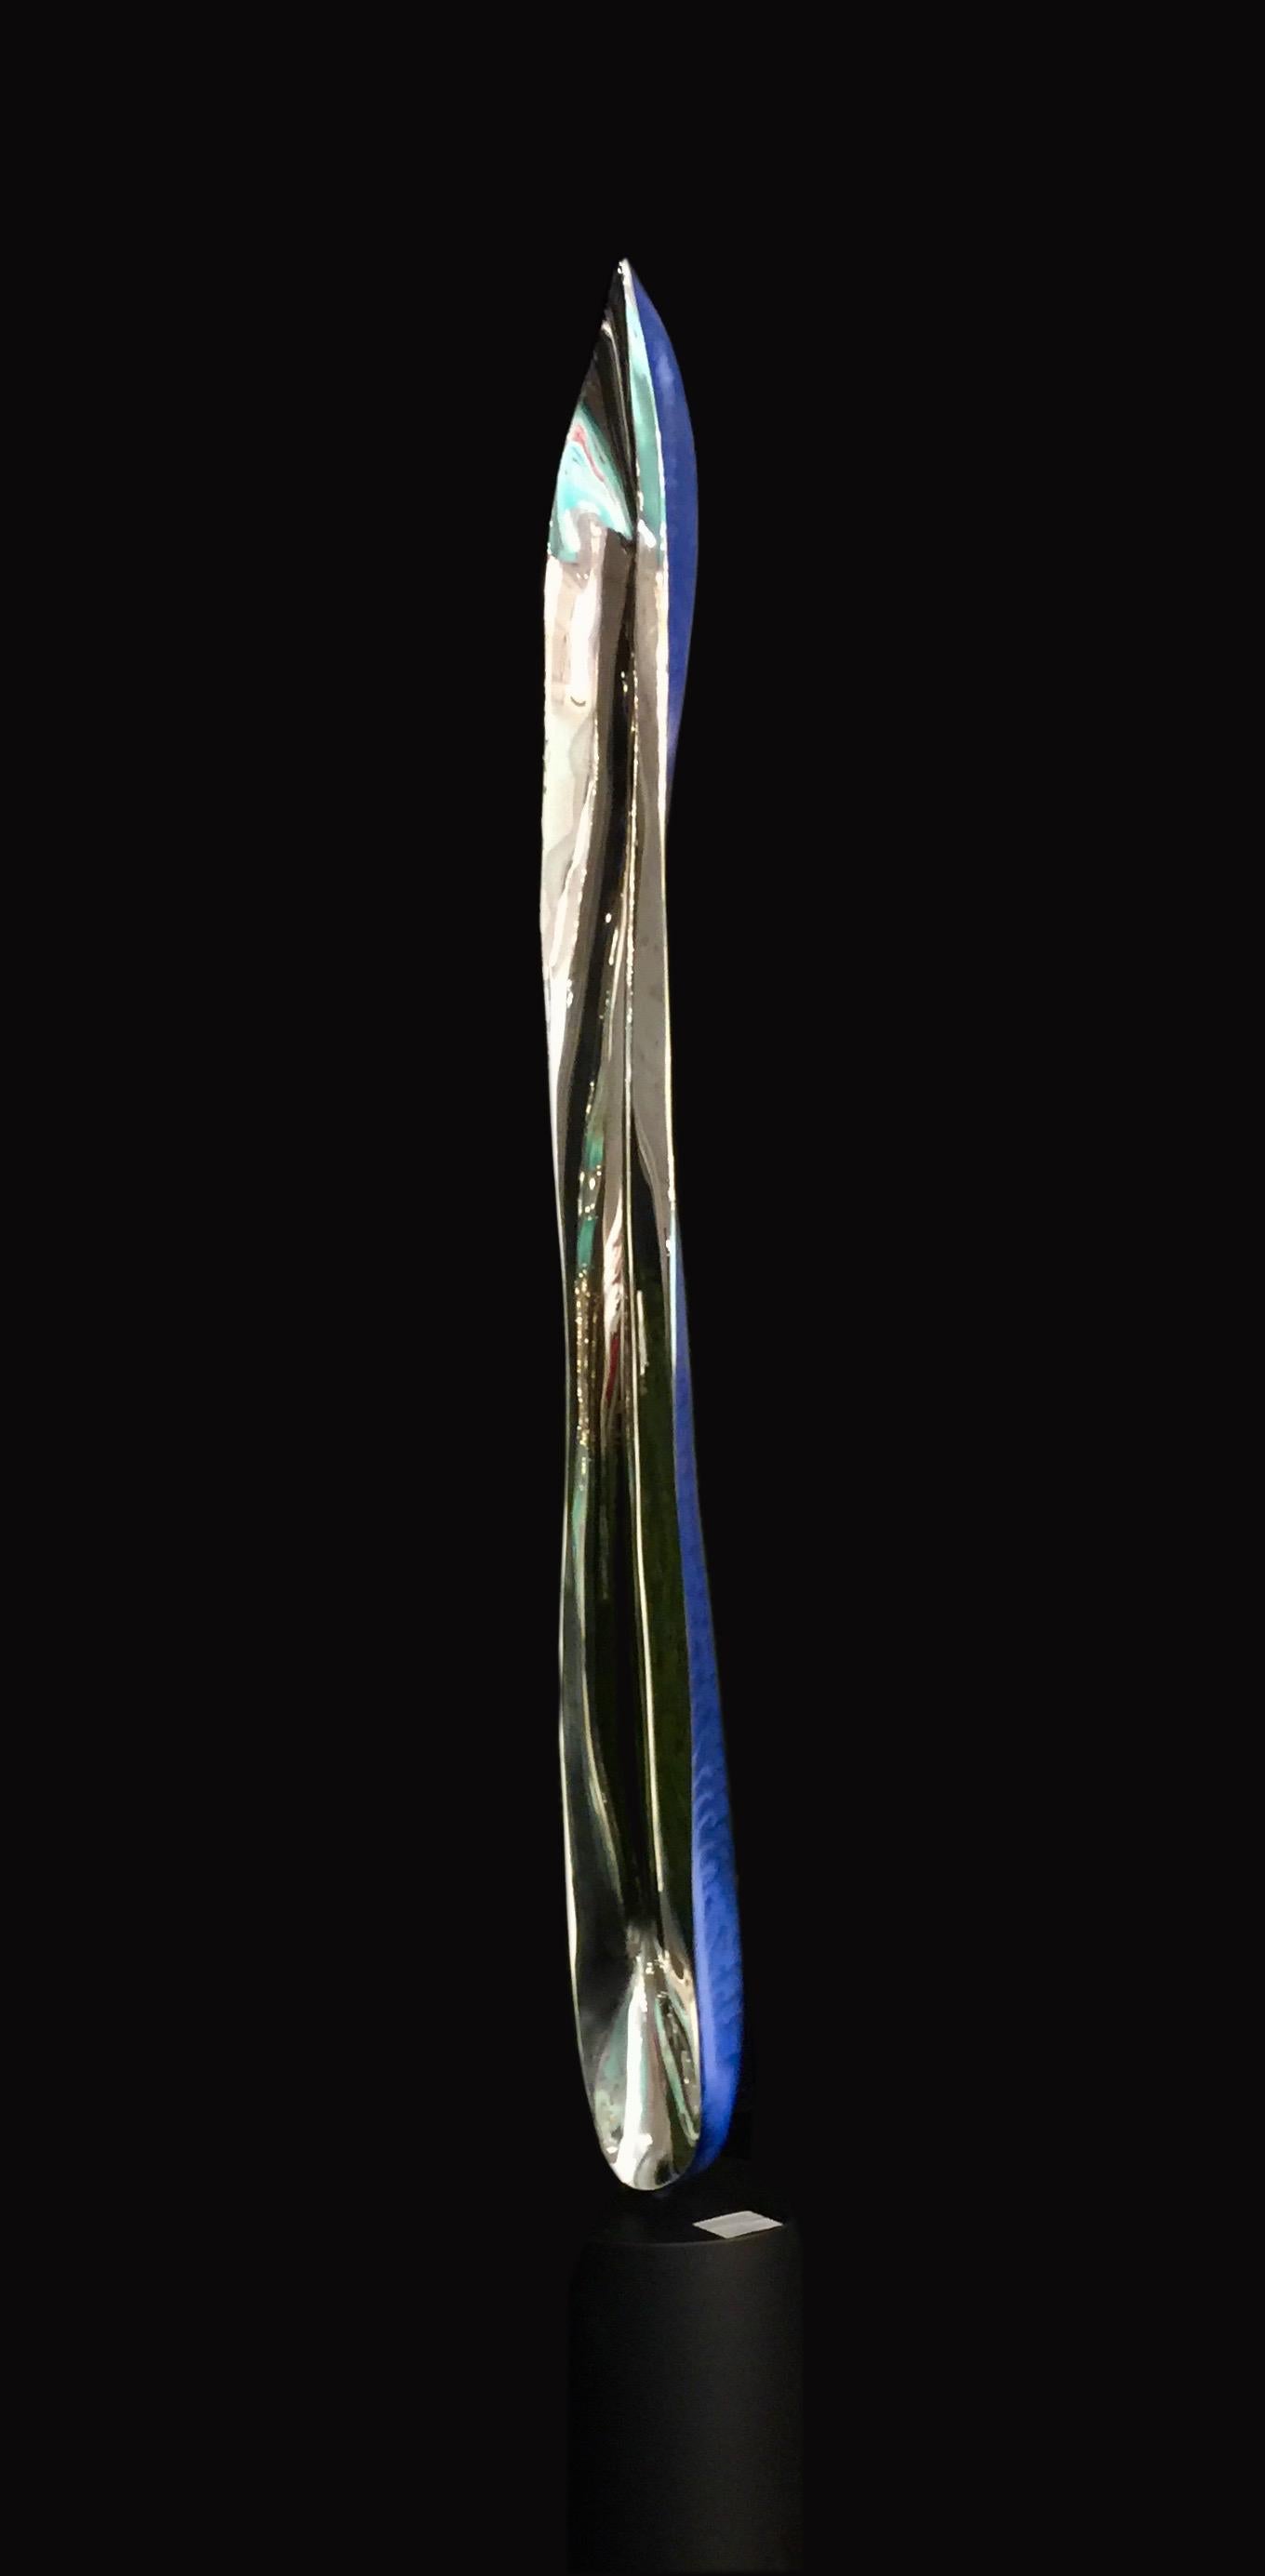 Italian stainless steel with a blue tint.

This sculpture will be shipped directly from the artist's studio.